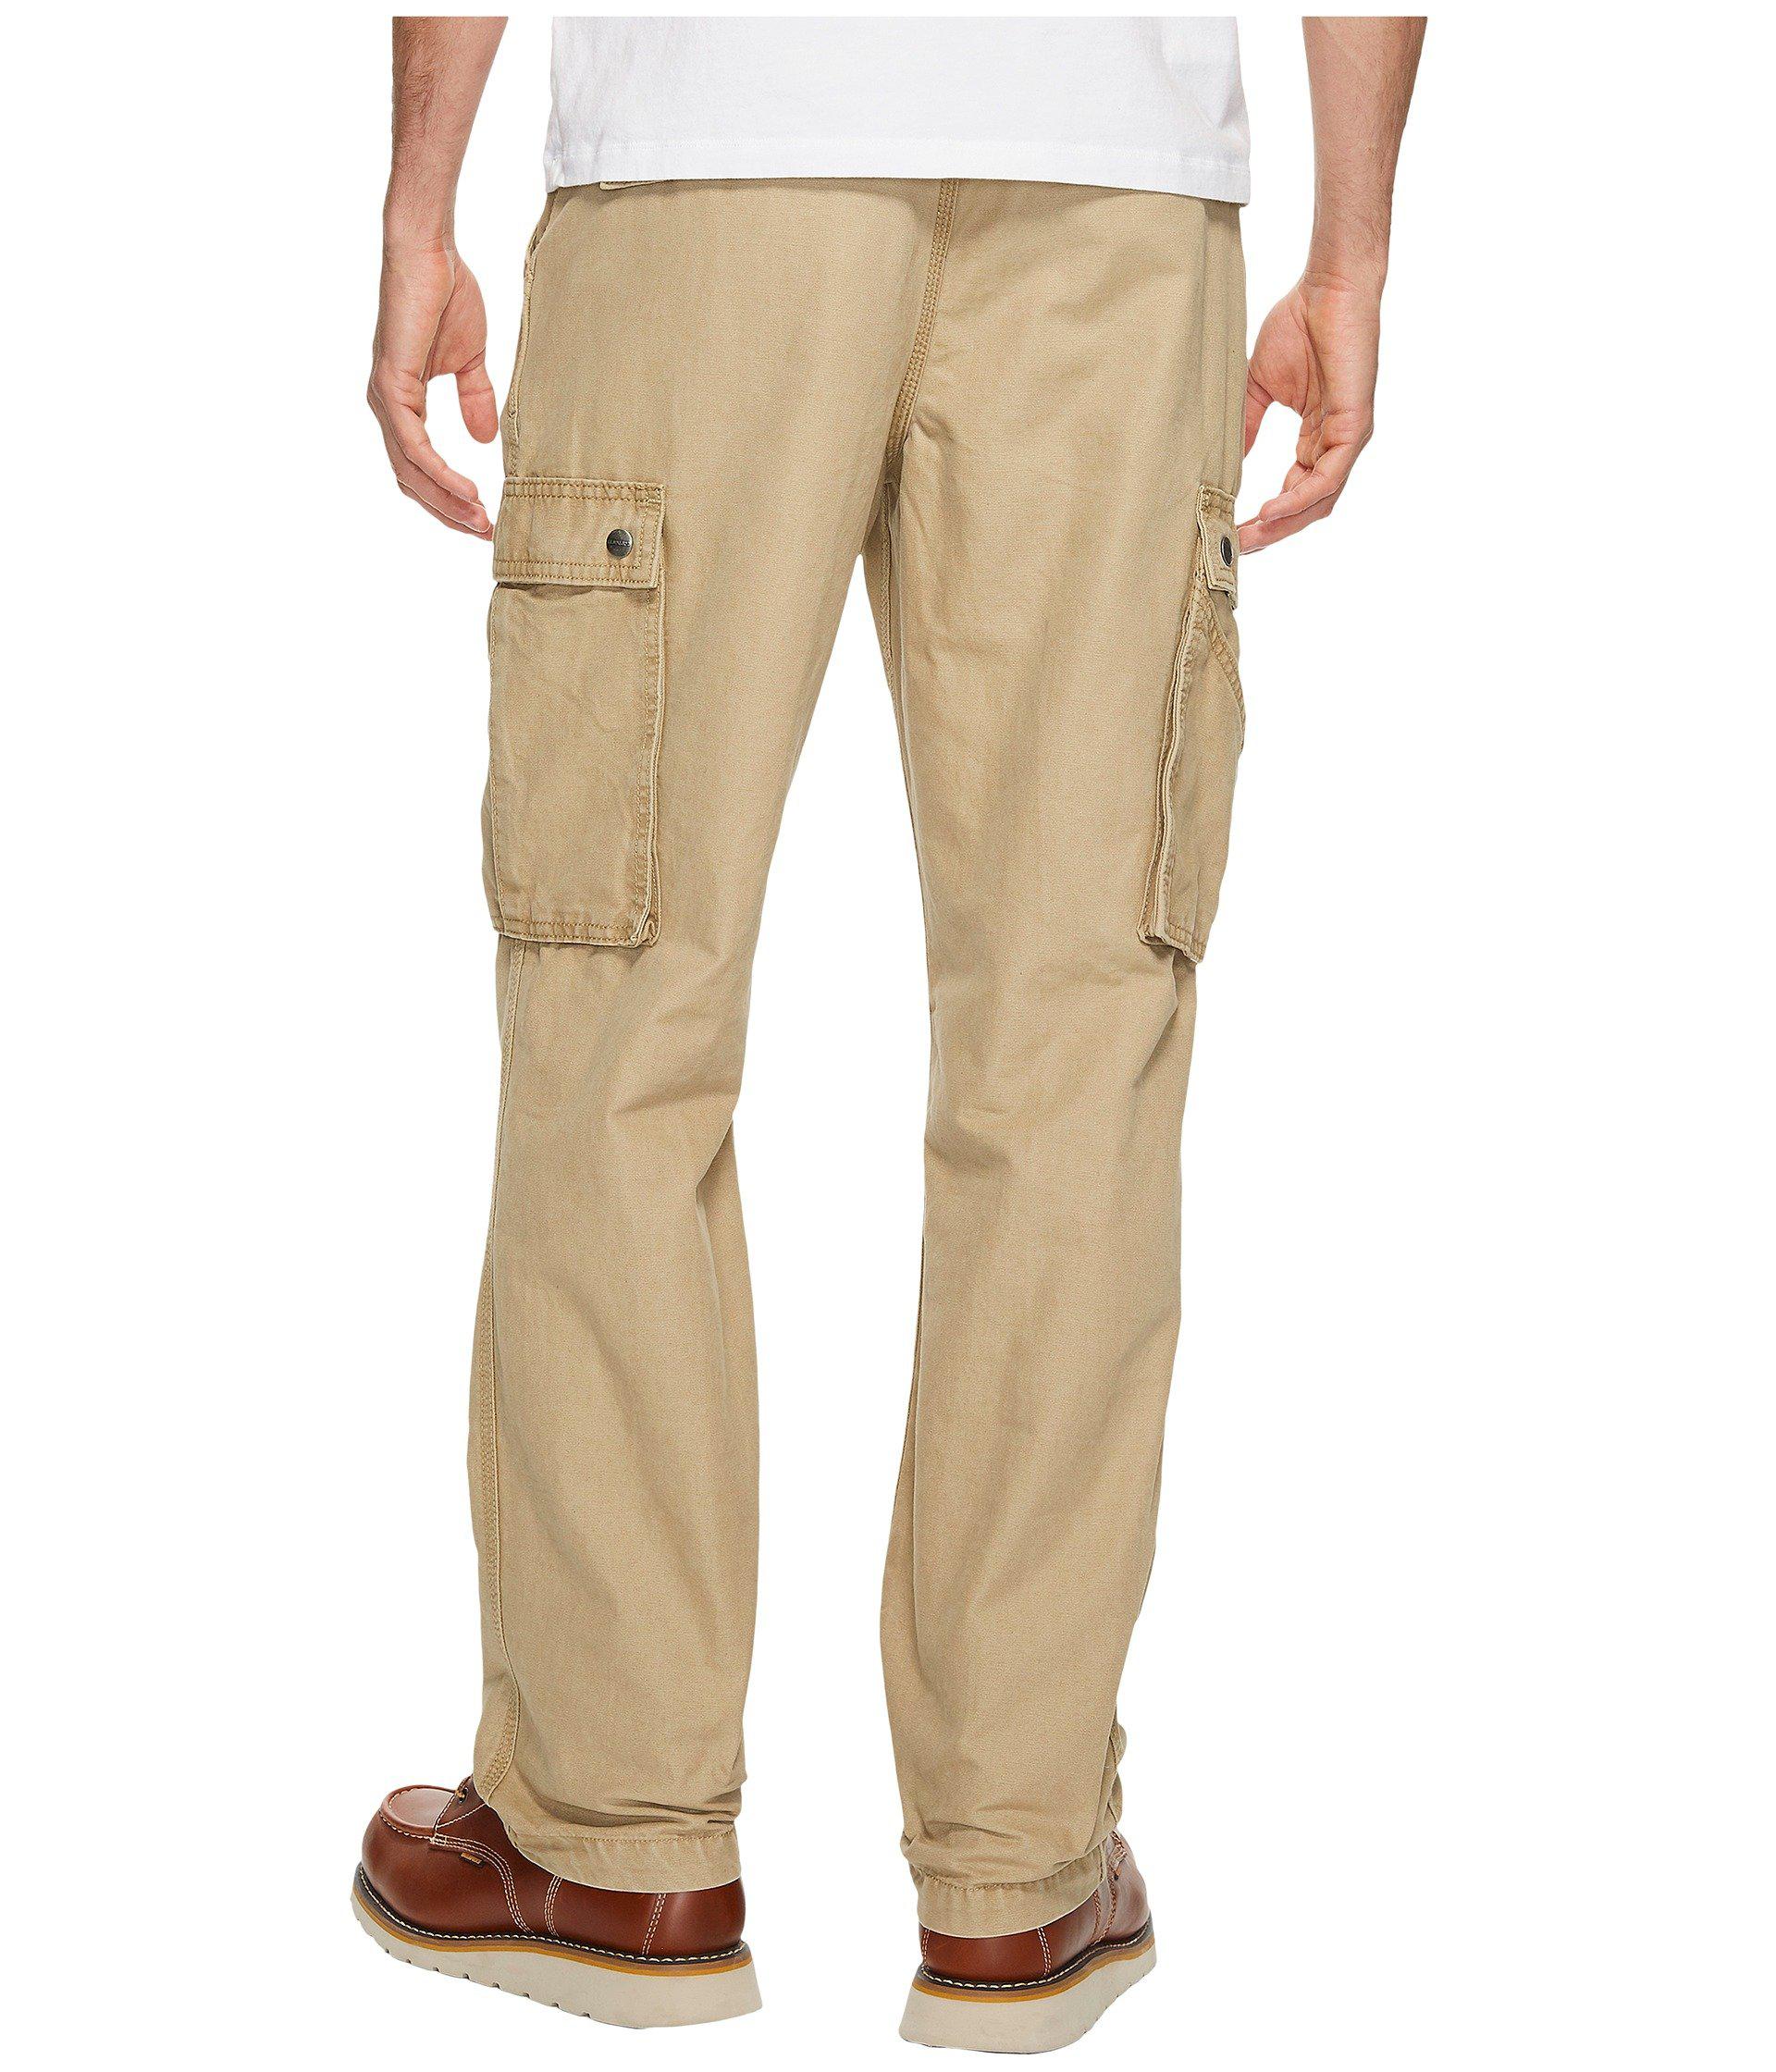 Carhartt Rugged Cargo Pant in Natural for Men - Lyst